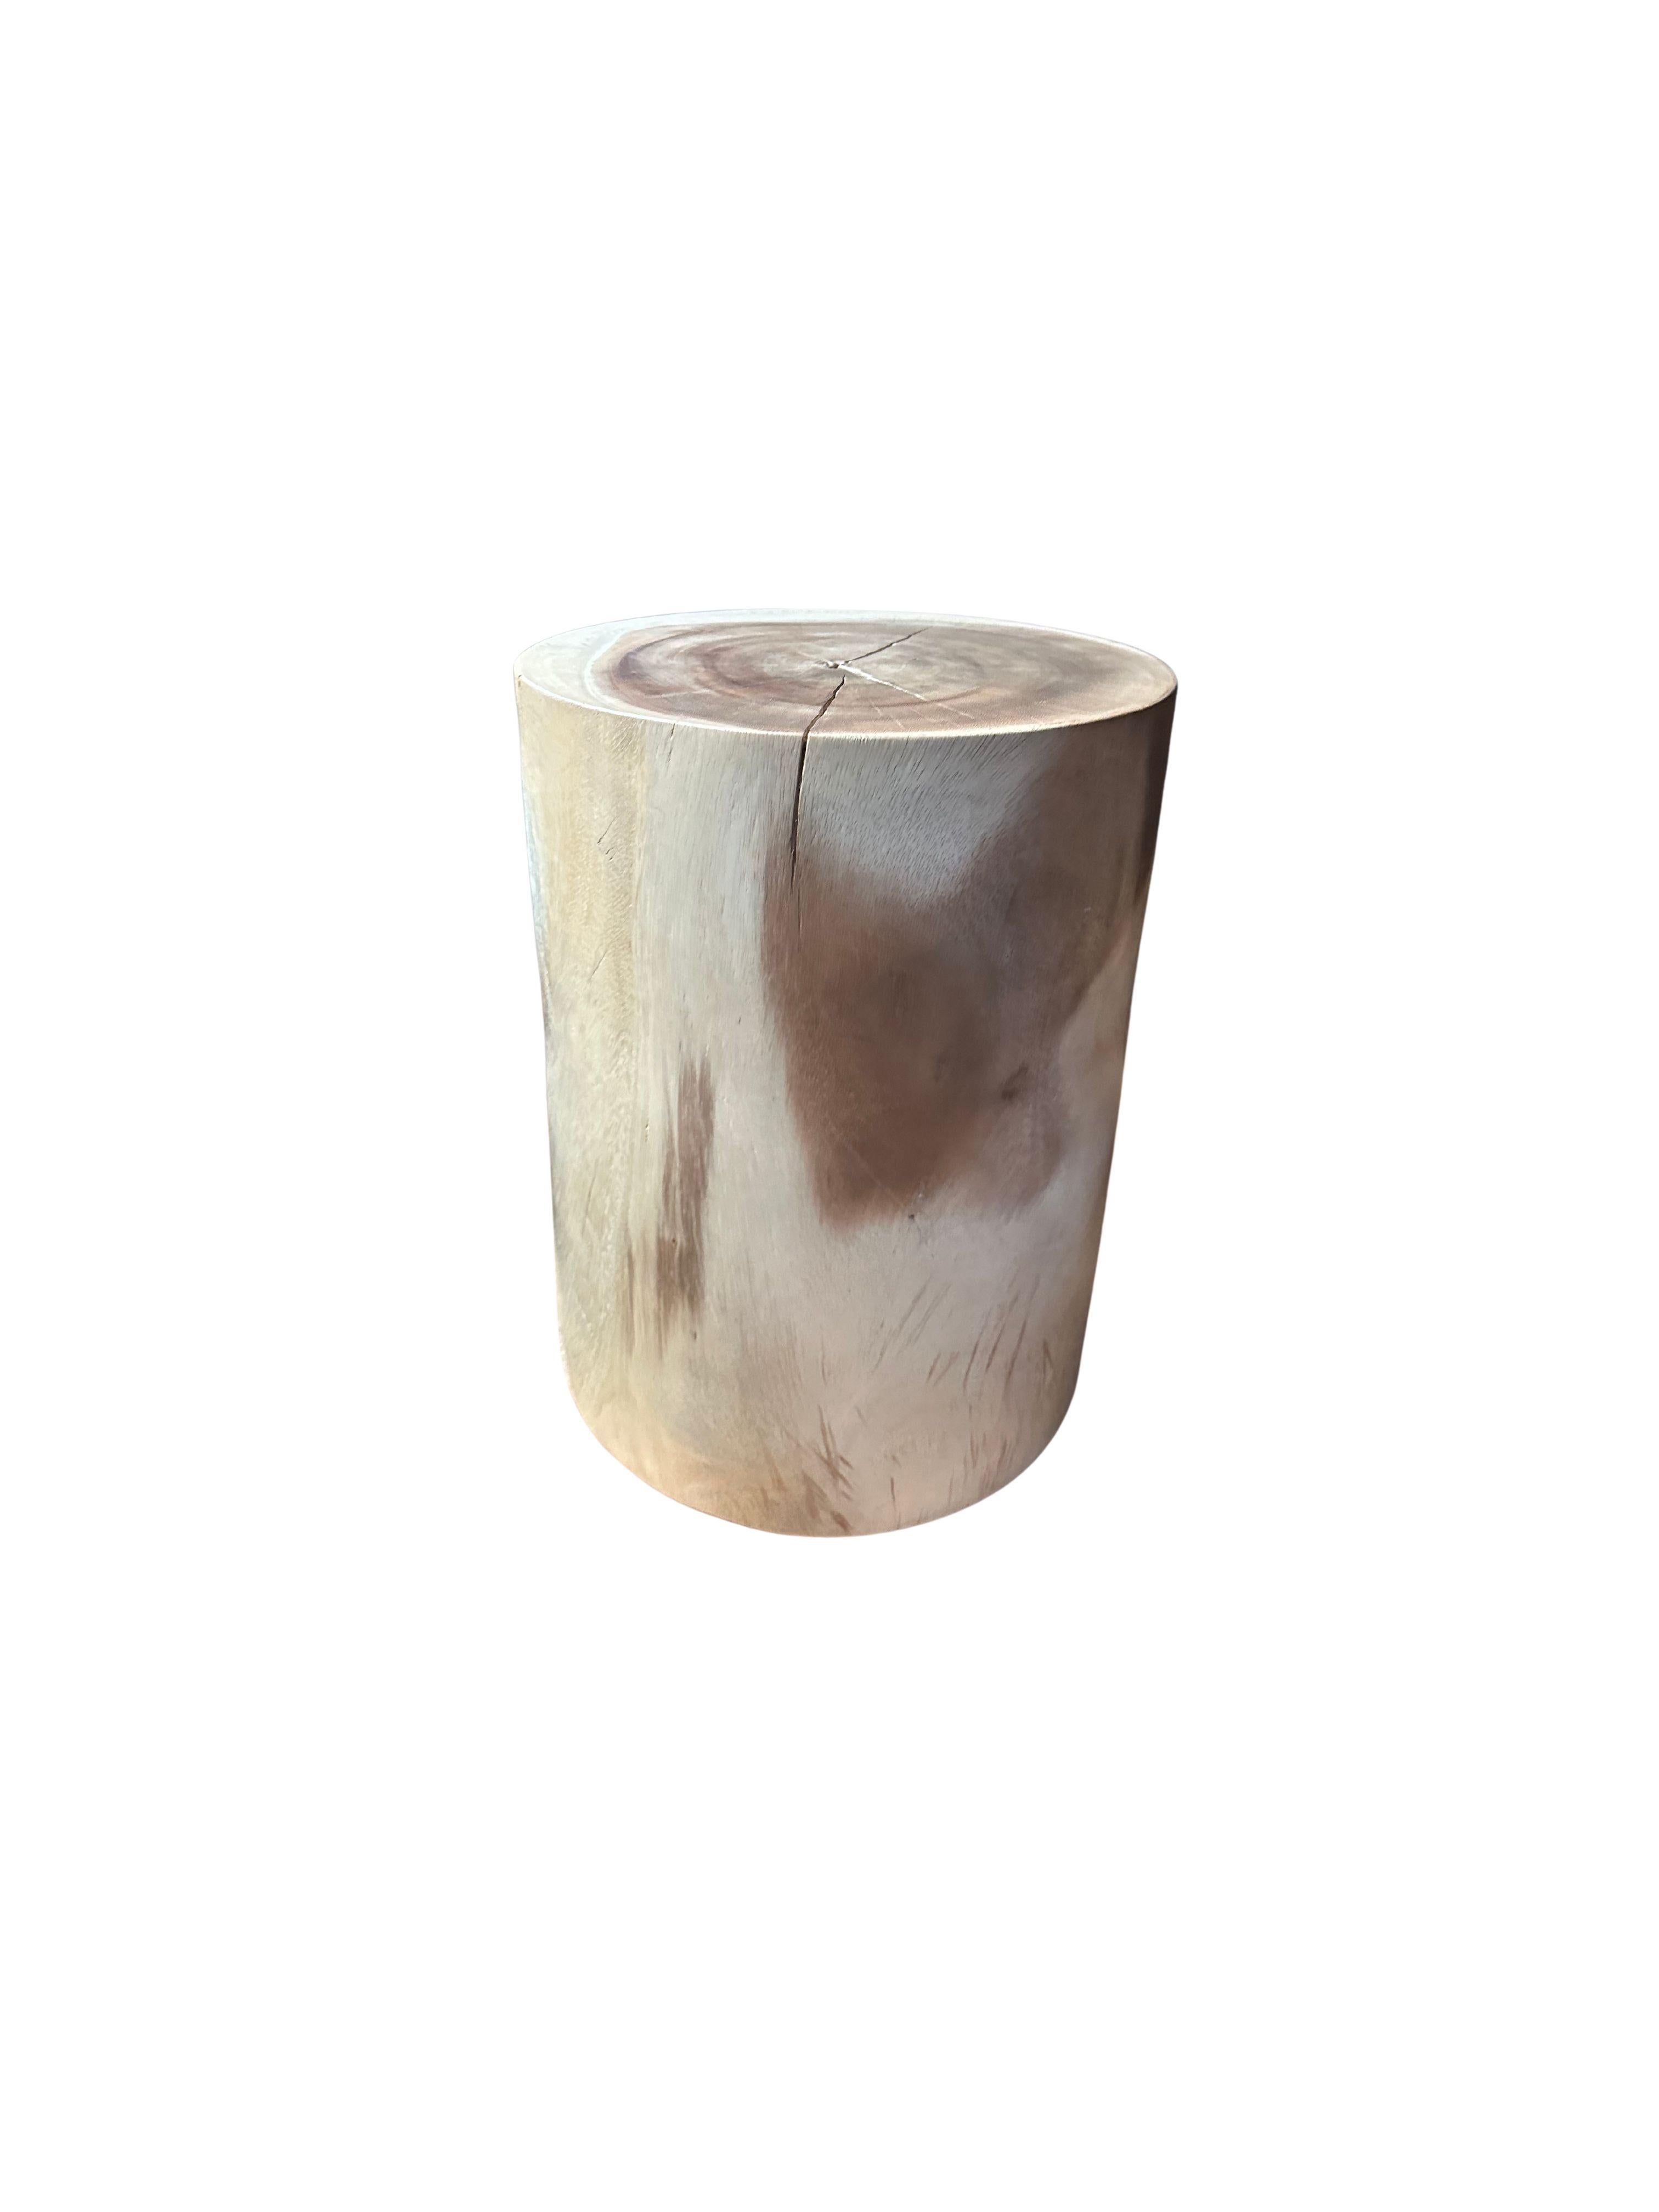 A wonderfully sculptural side table crafted from solid suar wood. It features a natural finish where the exterior was sanded and smoothed. The table features a wonderful mix of wood textures and shades. The perfect object to bring warmth to any